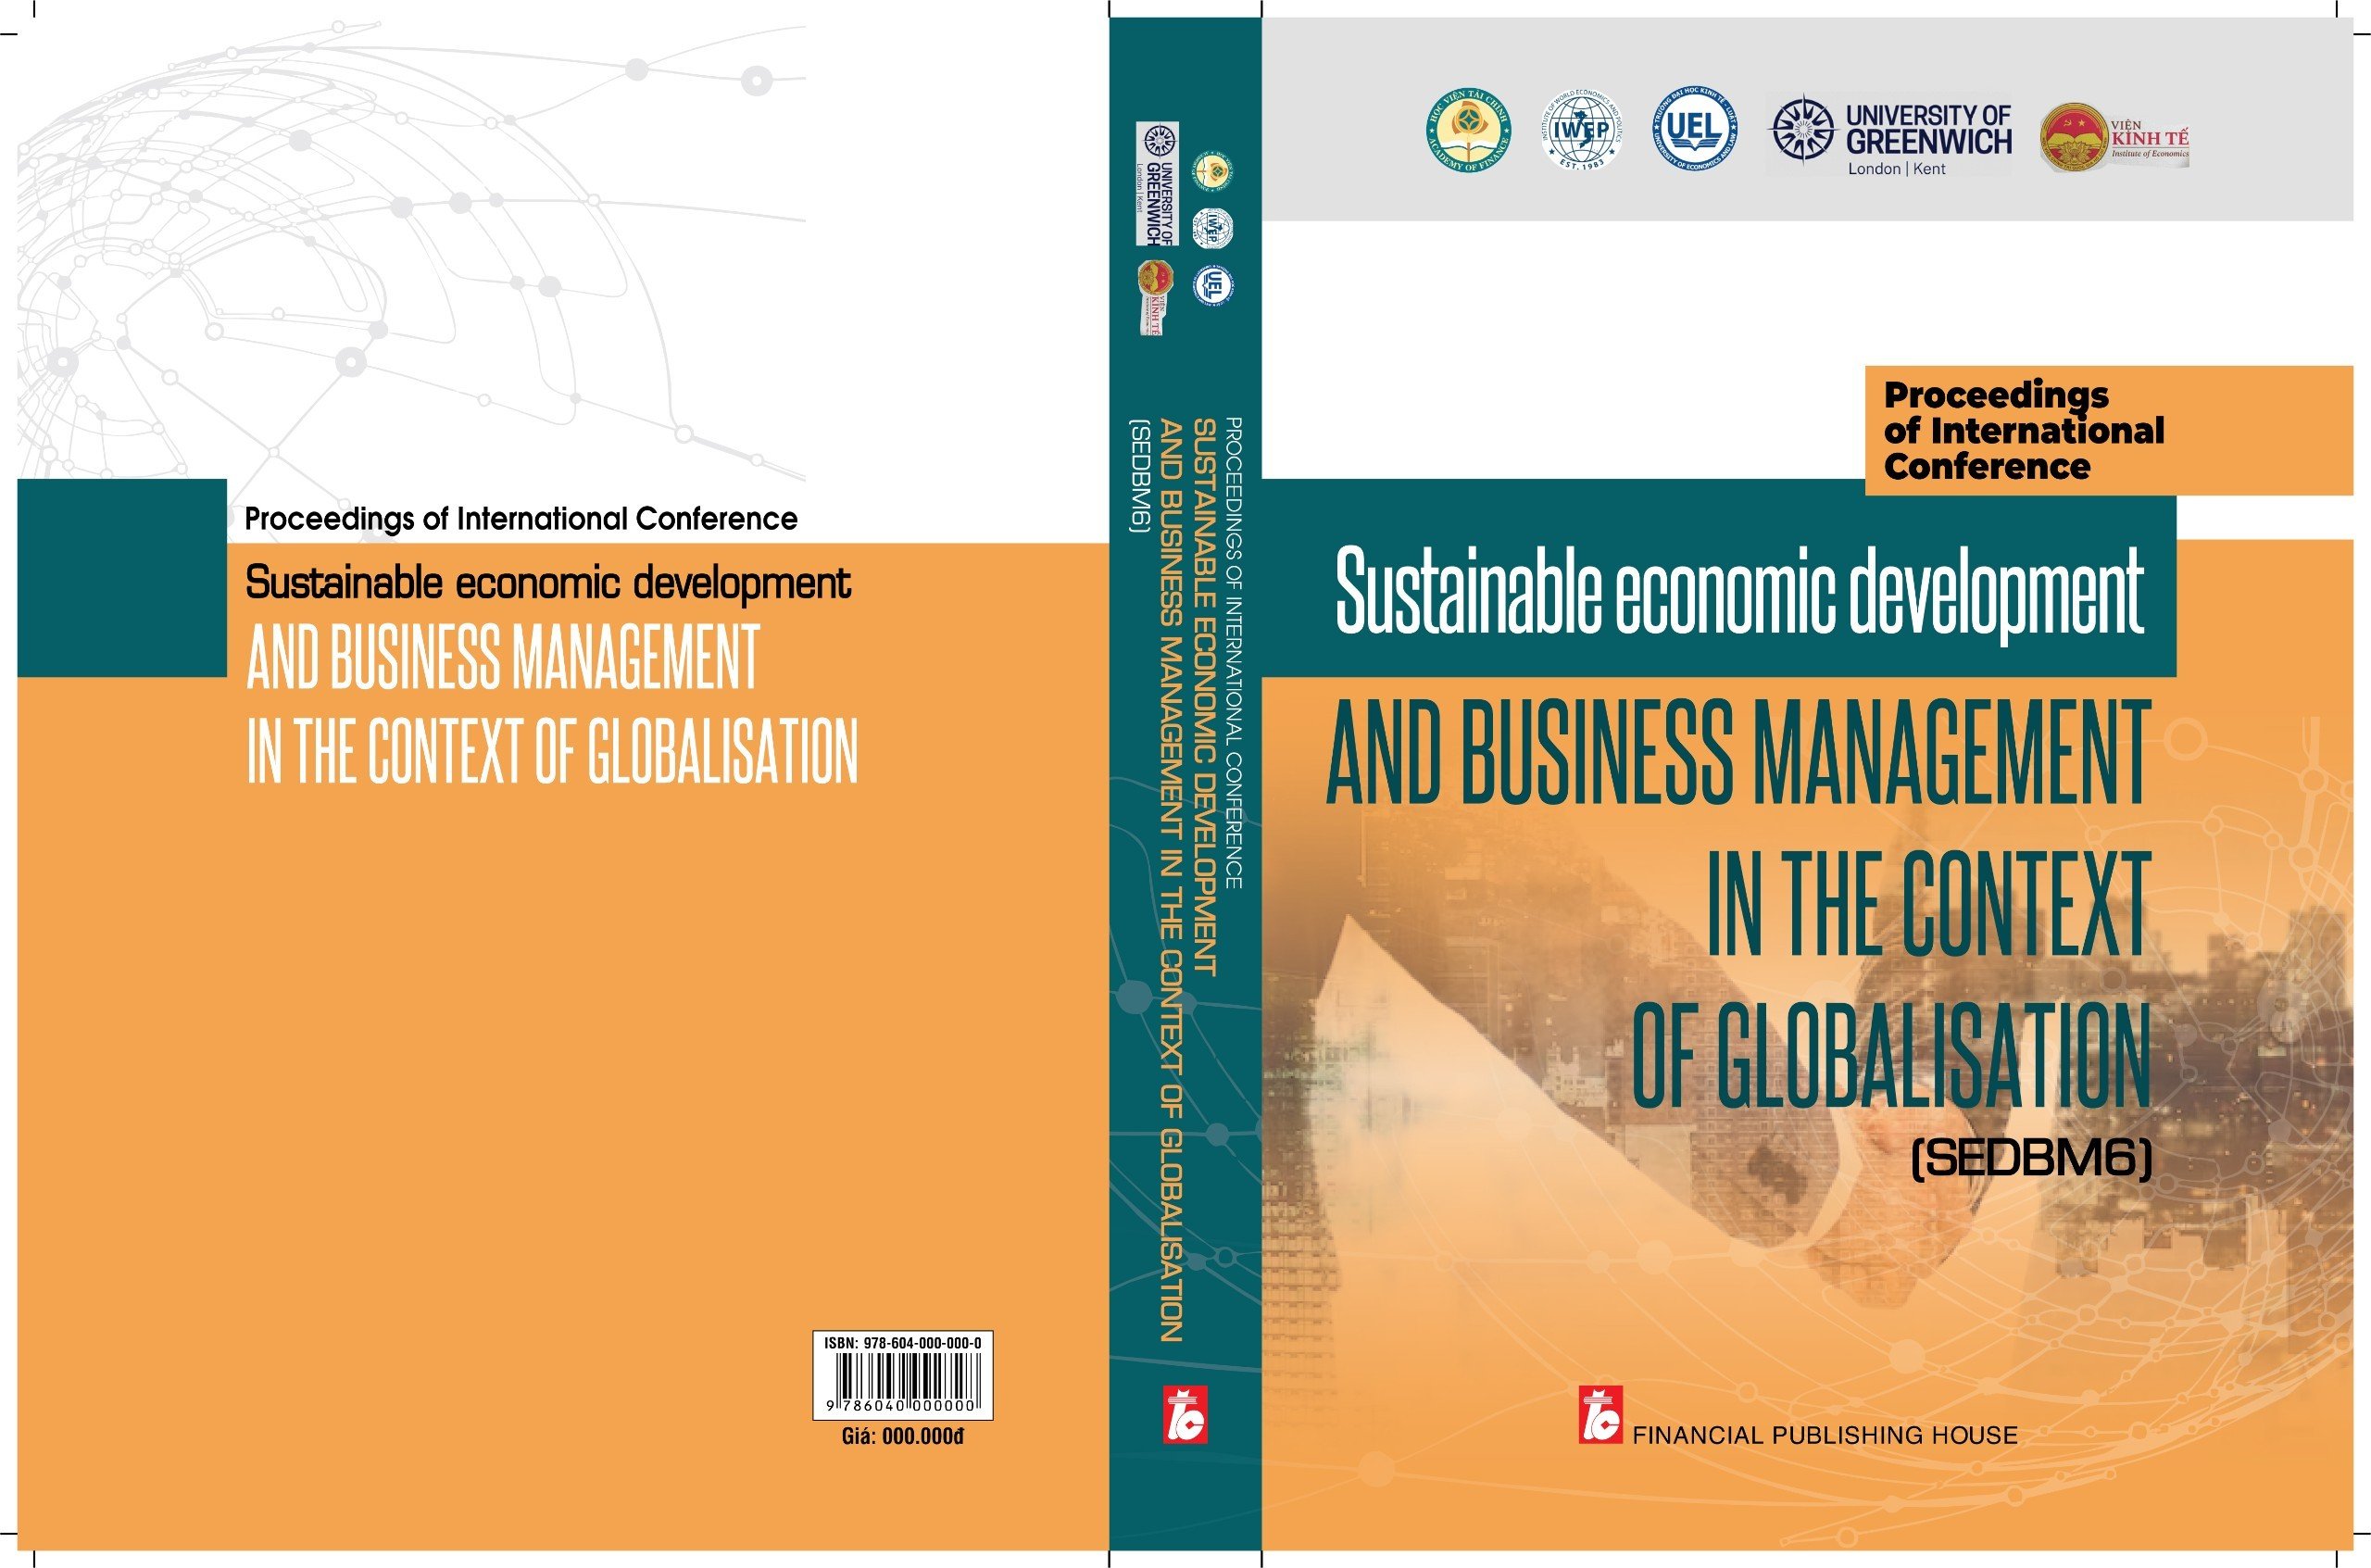 HTQT: "Sustainable Economic Development and Bussiness Management in the Context of Globalization - SEDBM6"